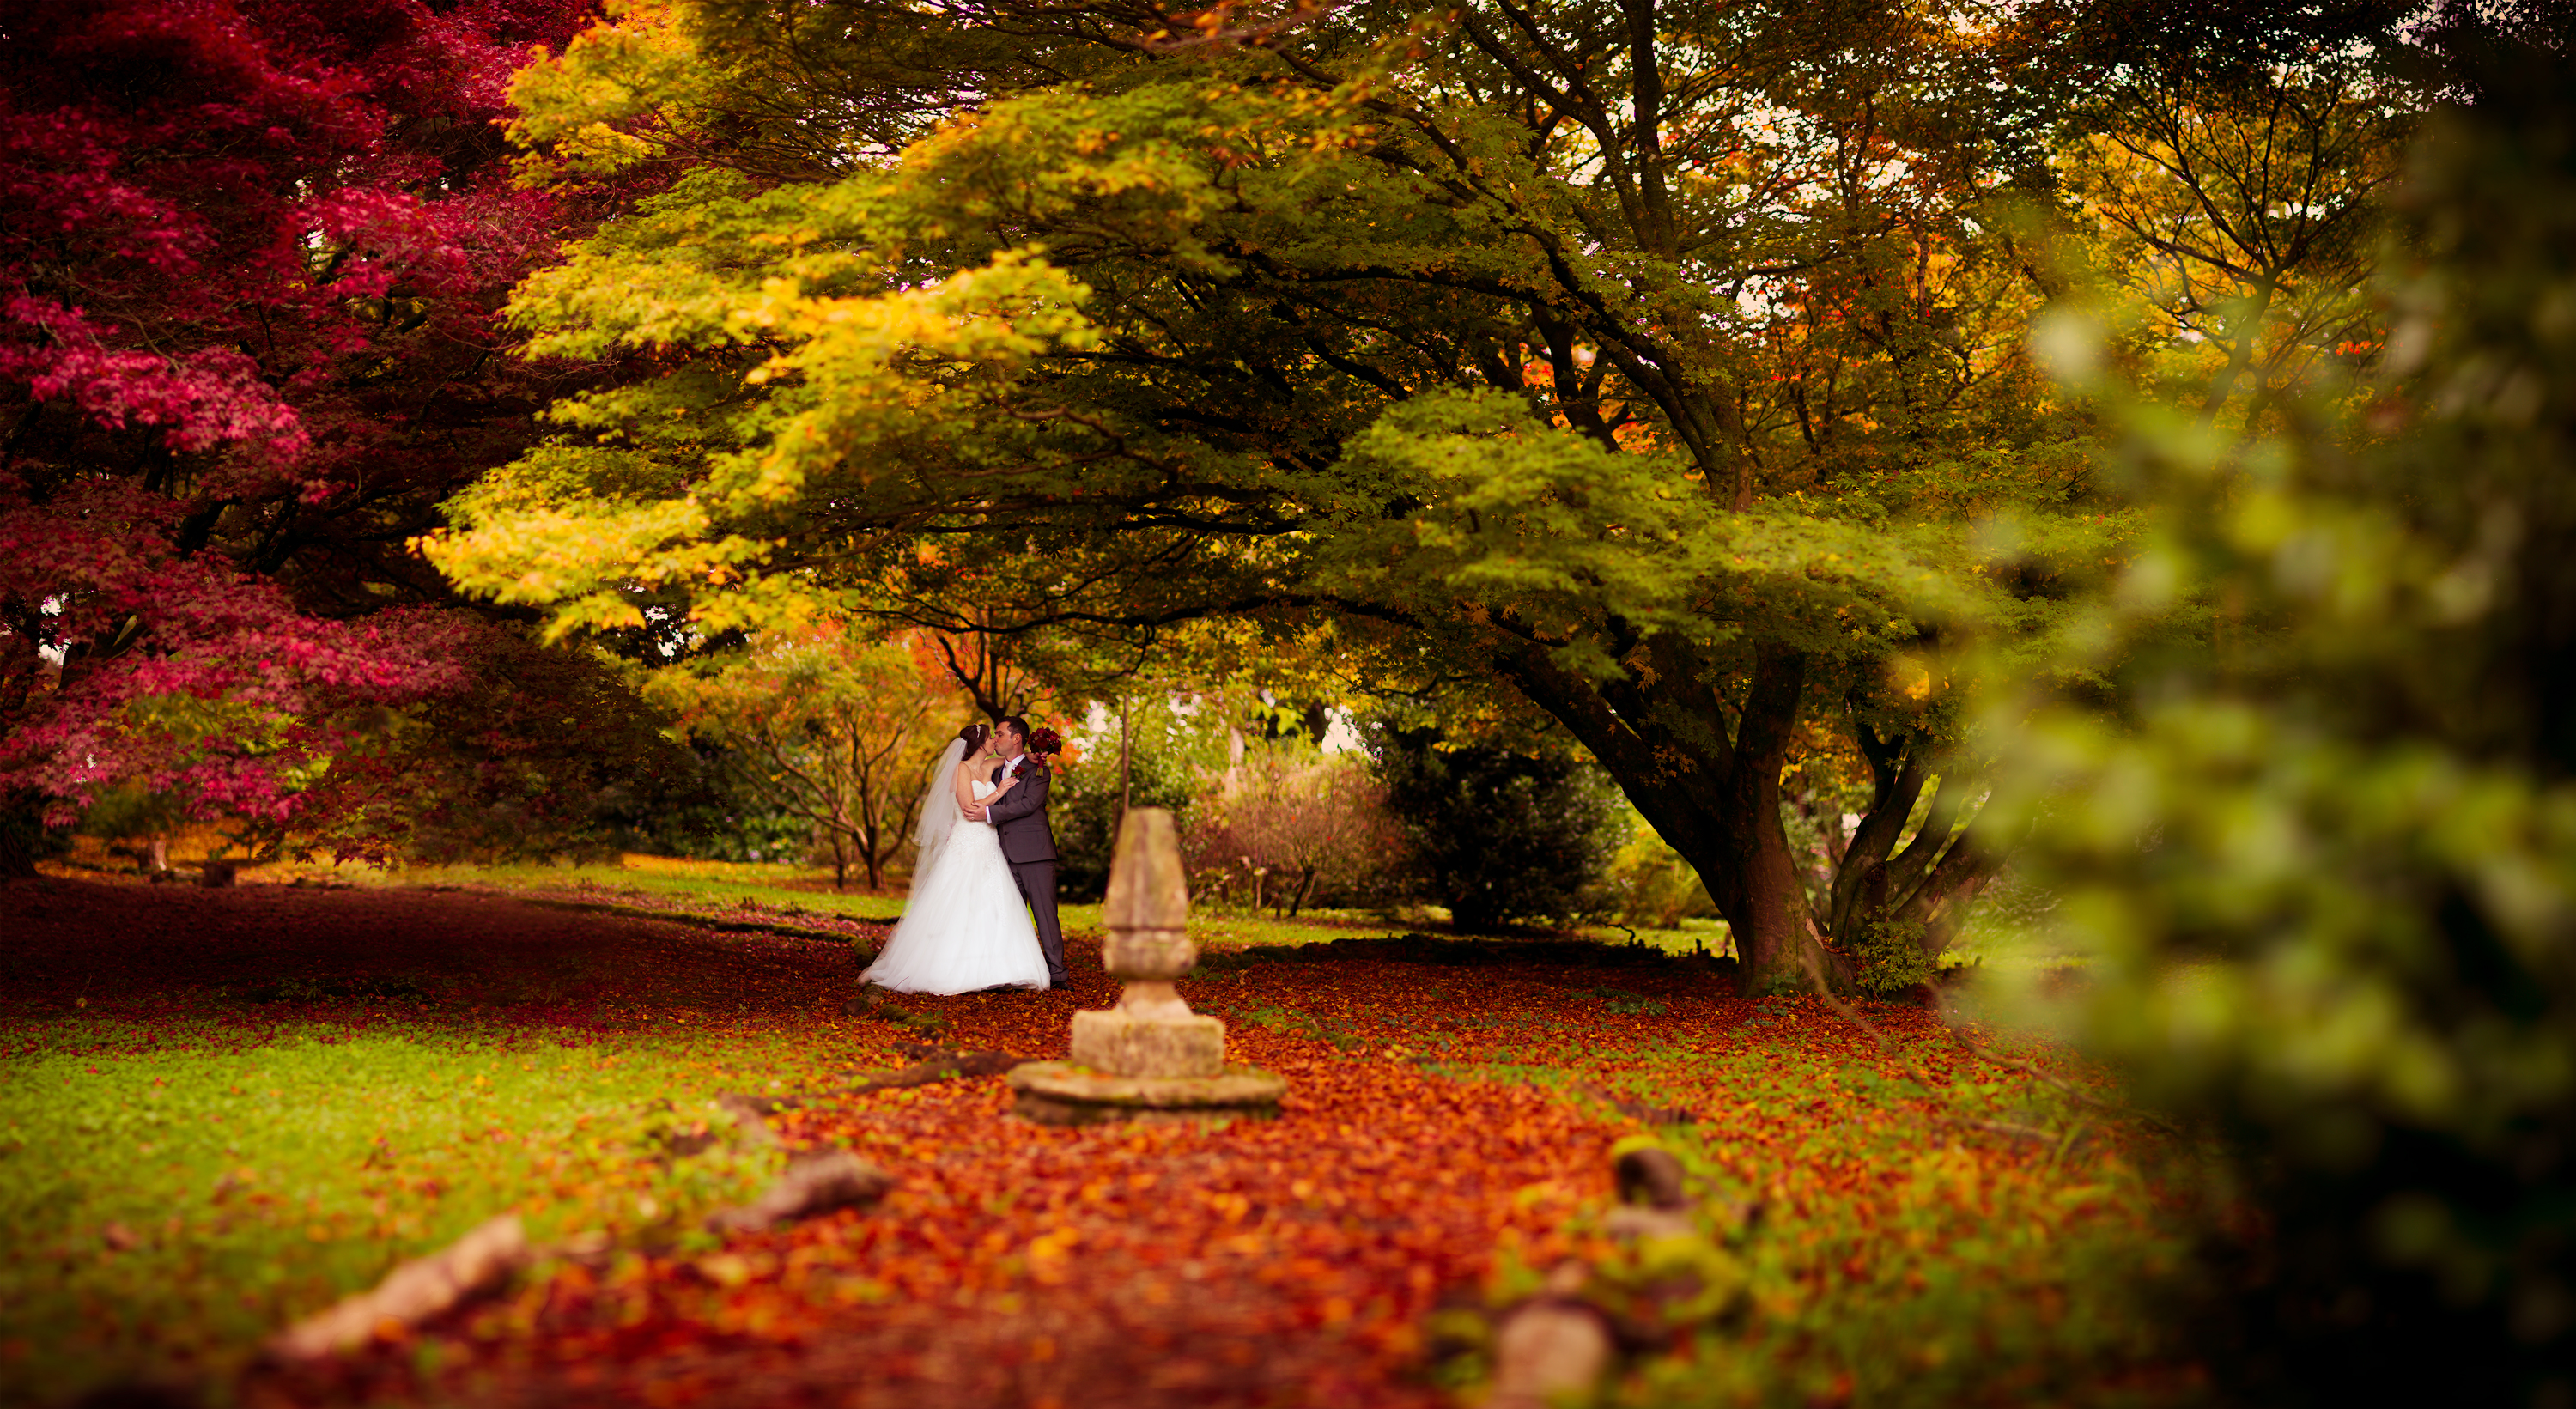 Claire and Brendan’s Autumn wedding at the Miskin Manor Cardiff